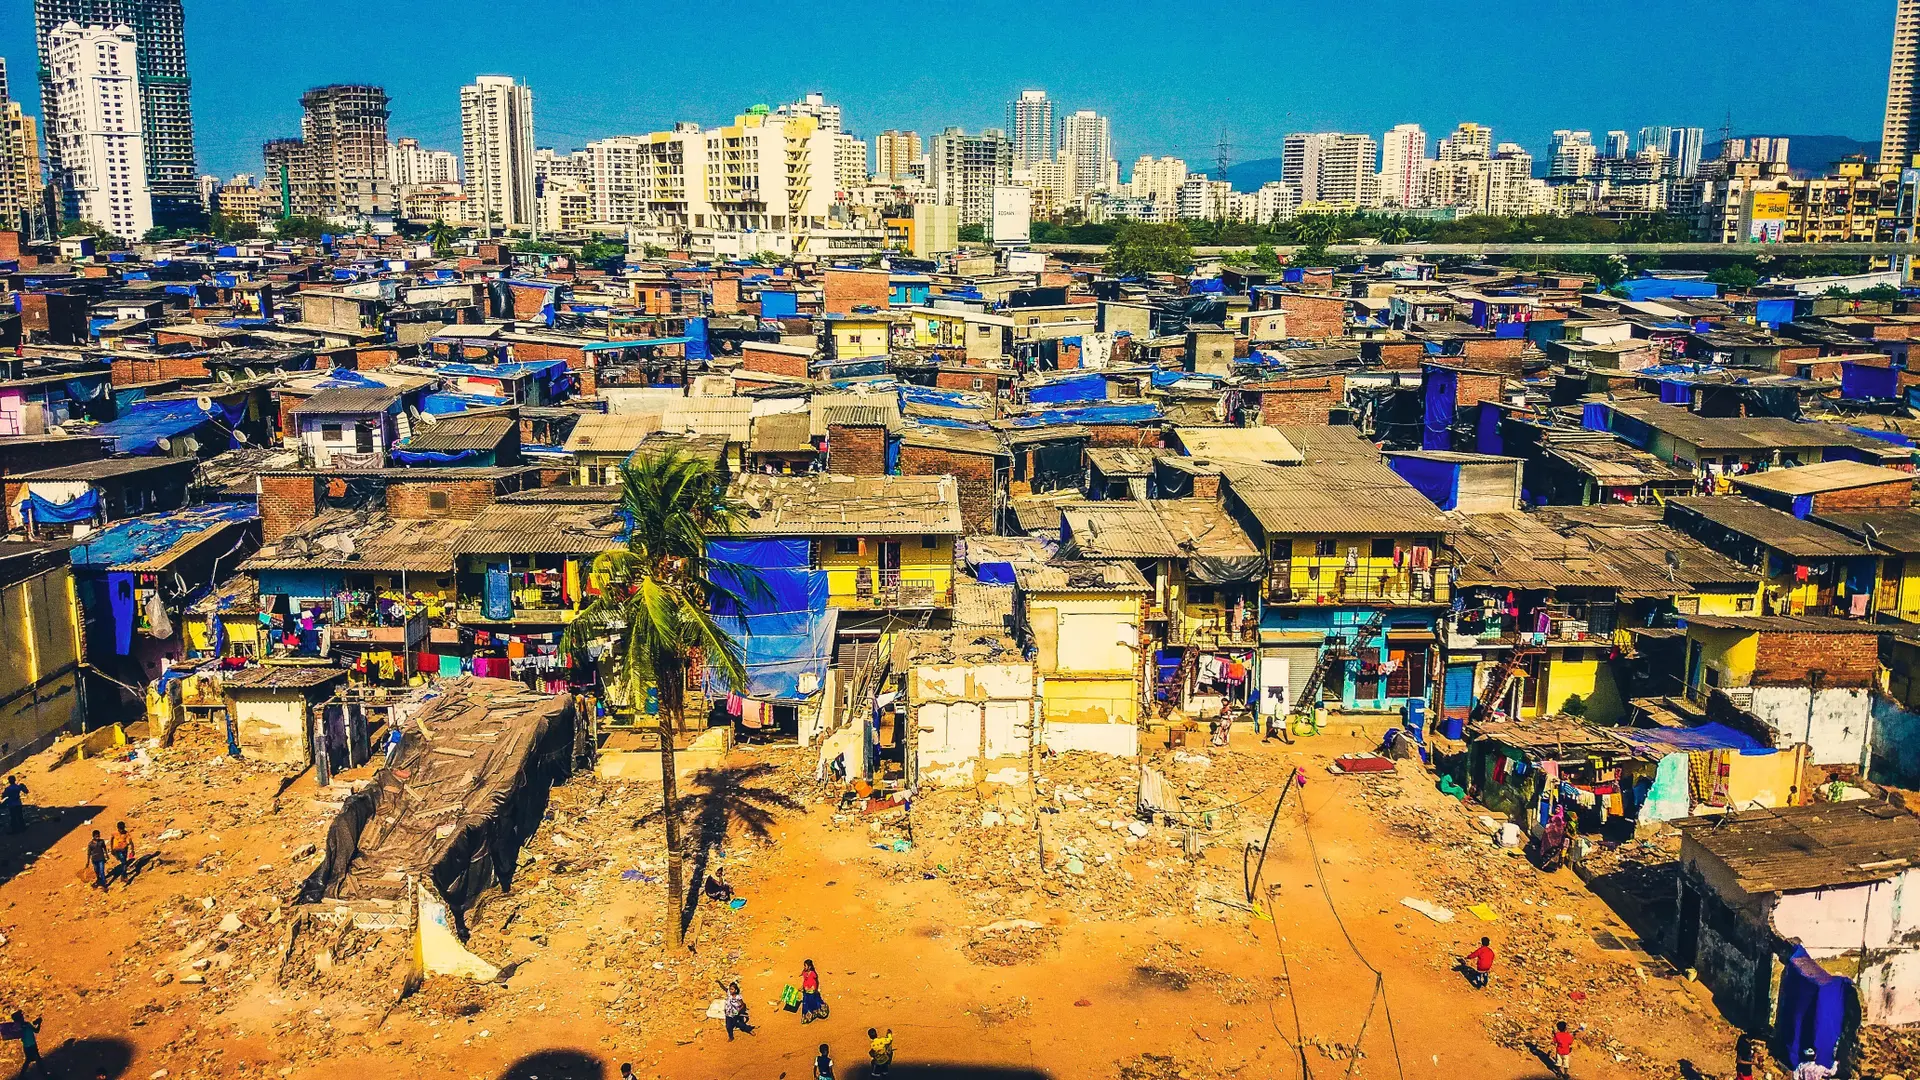 Shantytown in Mumbai with one palm tree, small houses in yellow and blue mainly and a lot of sand.